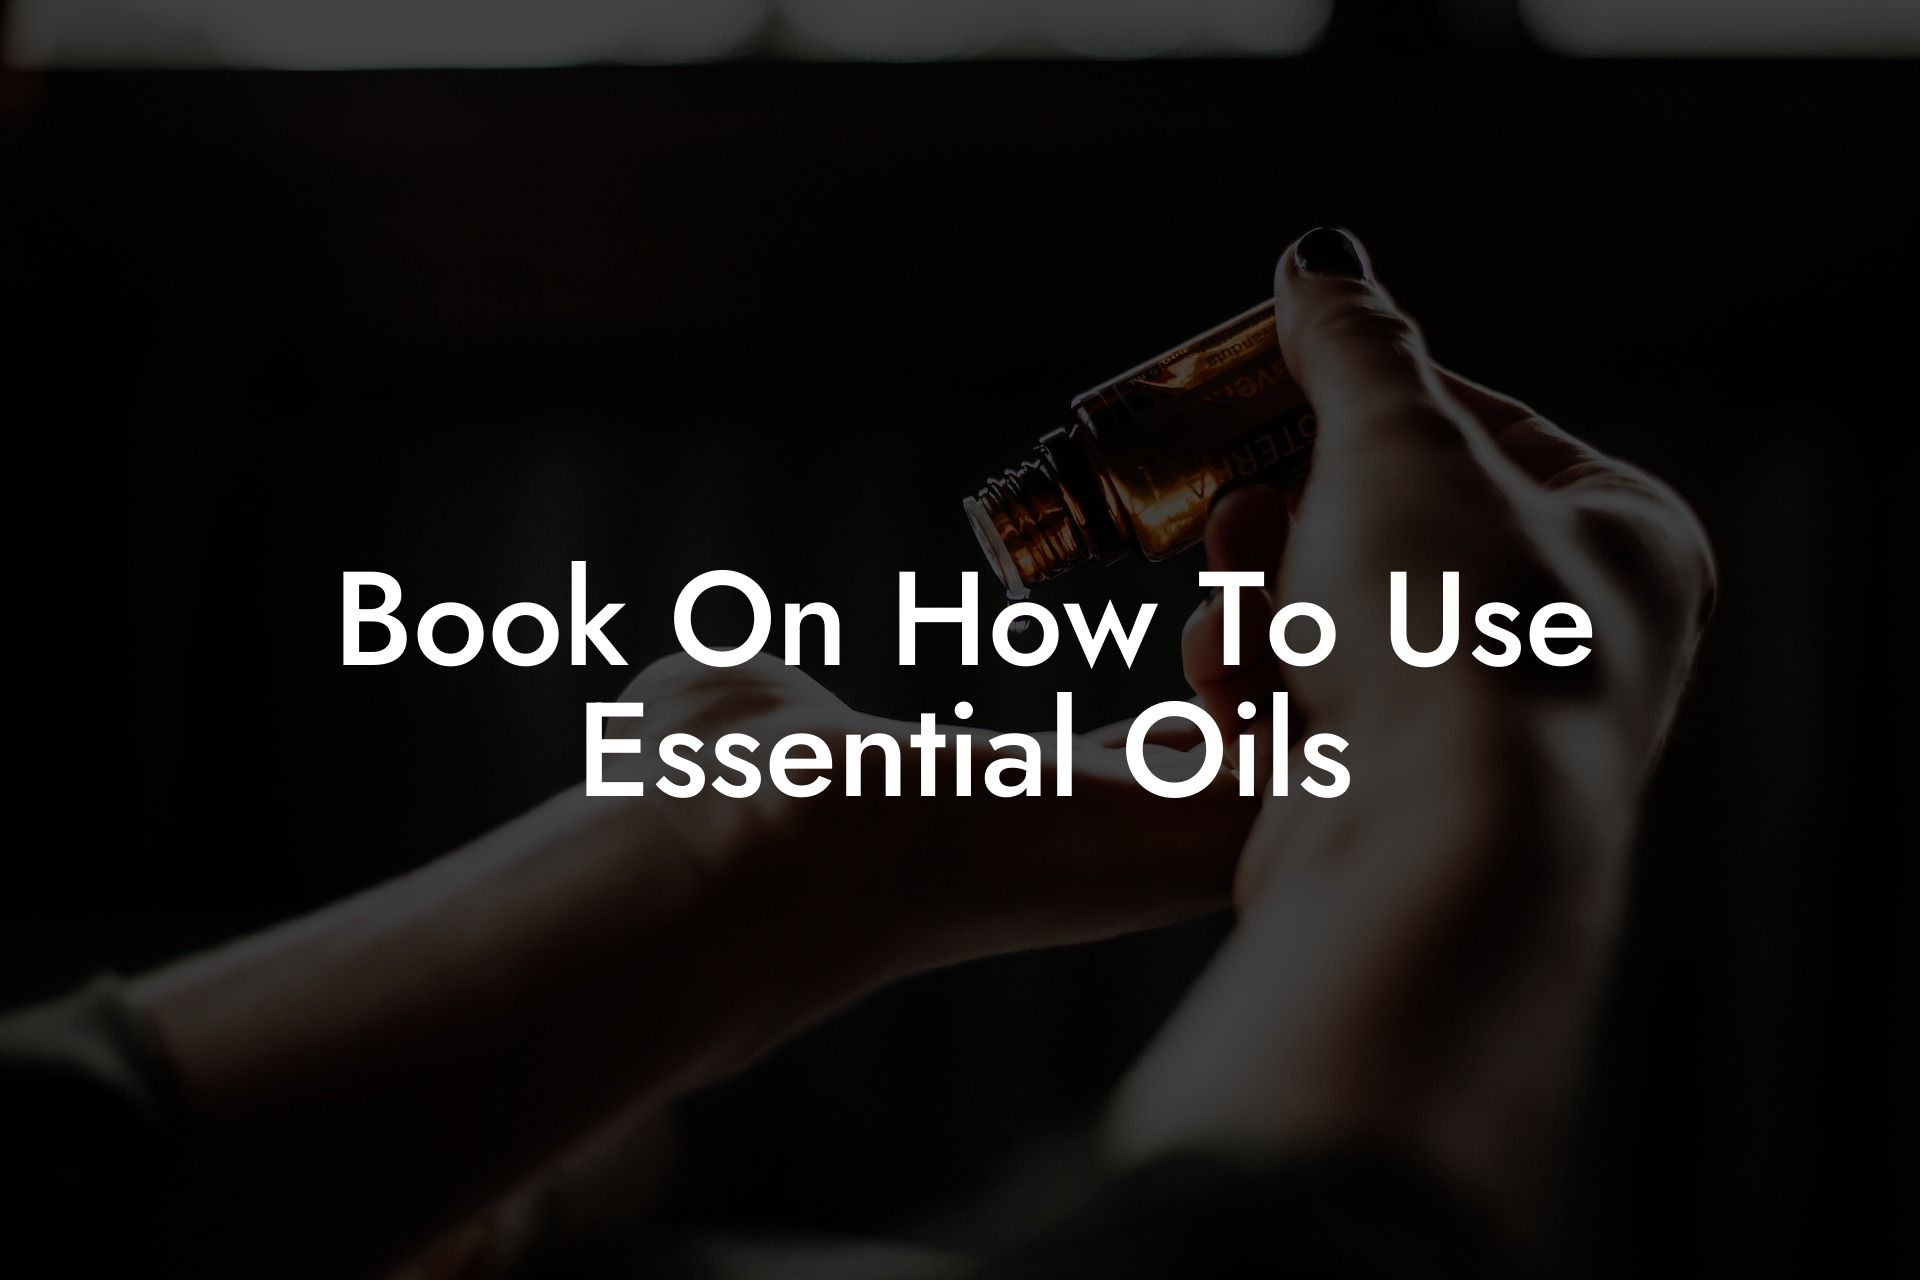 Book On How To Use Essential Oils